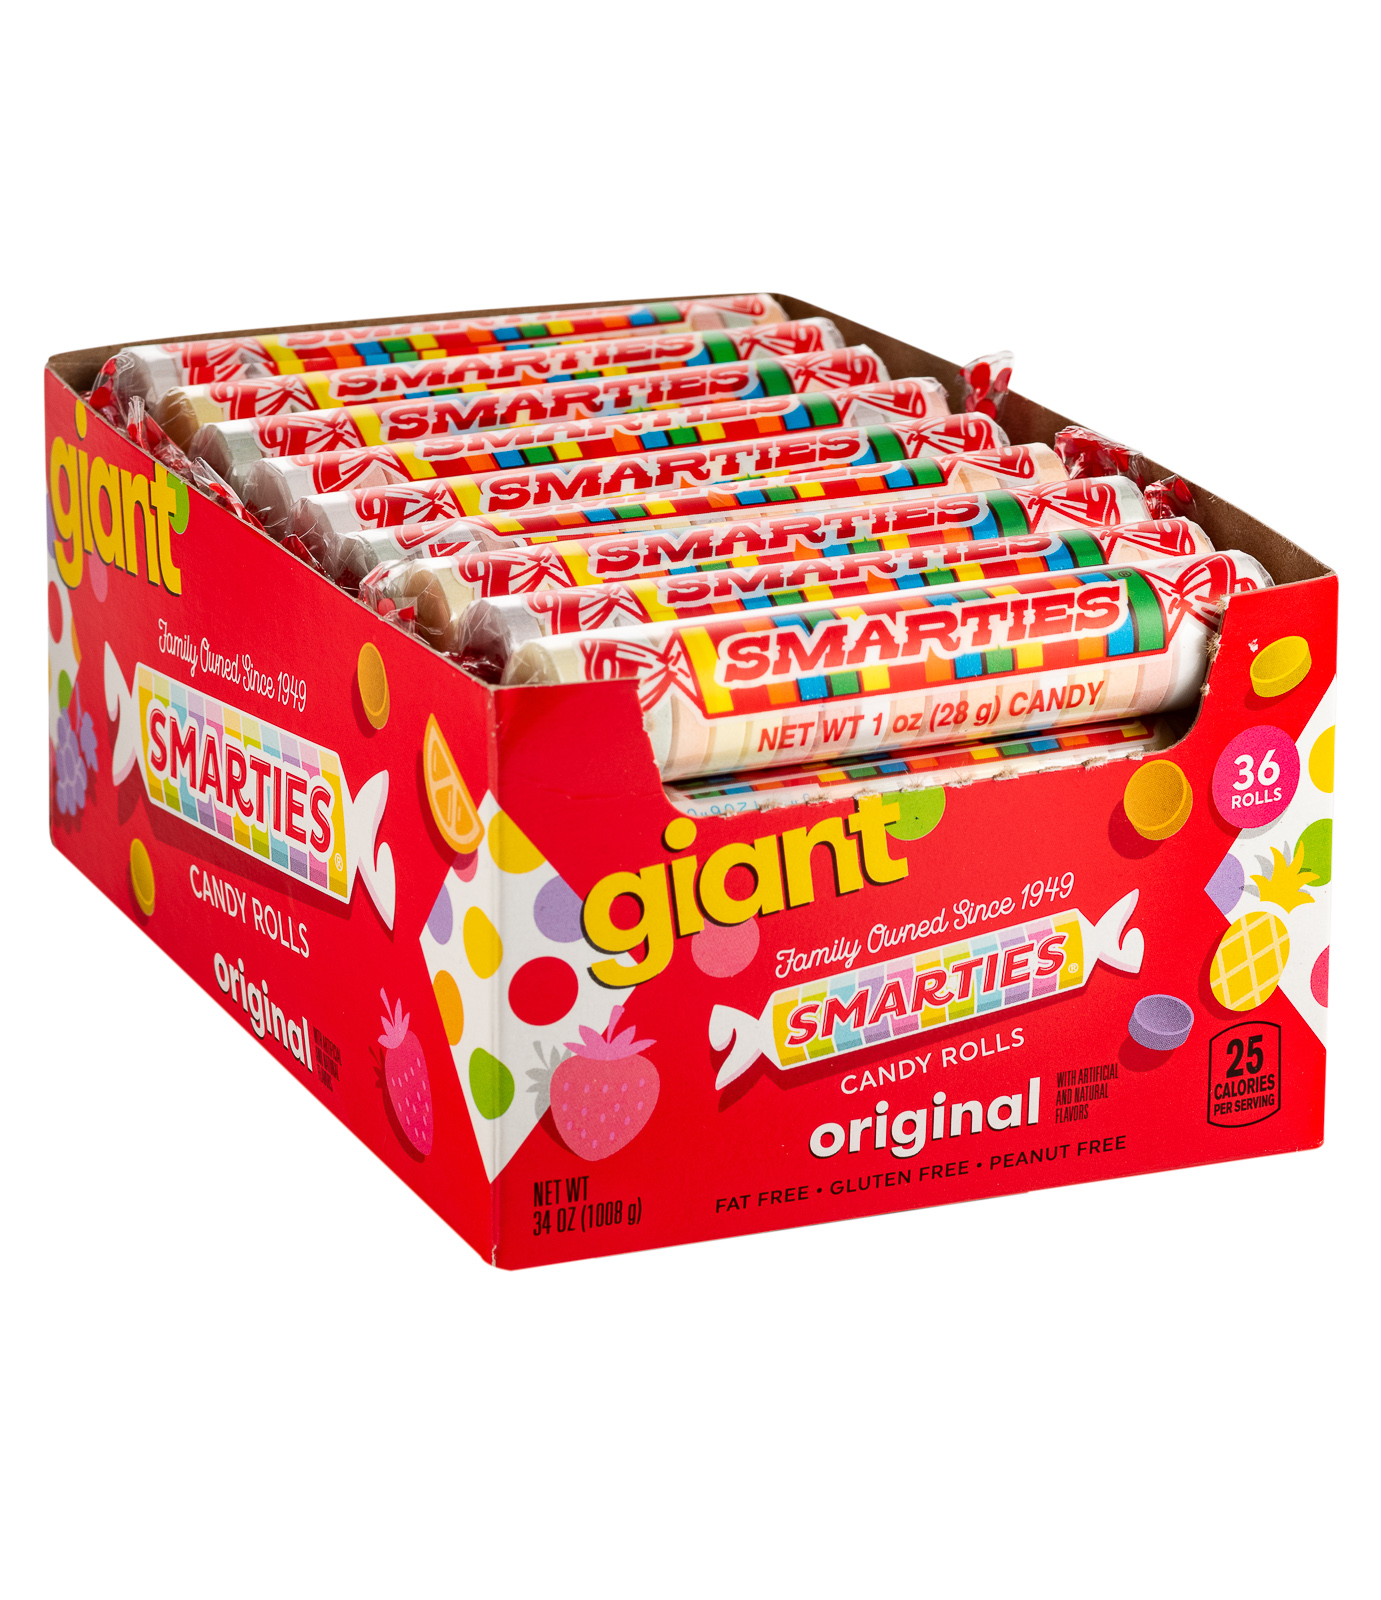 Smarties Candy Rolls, Giant, 36 Count - image 1 of 8